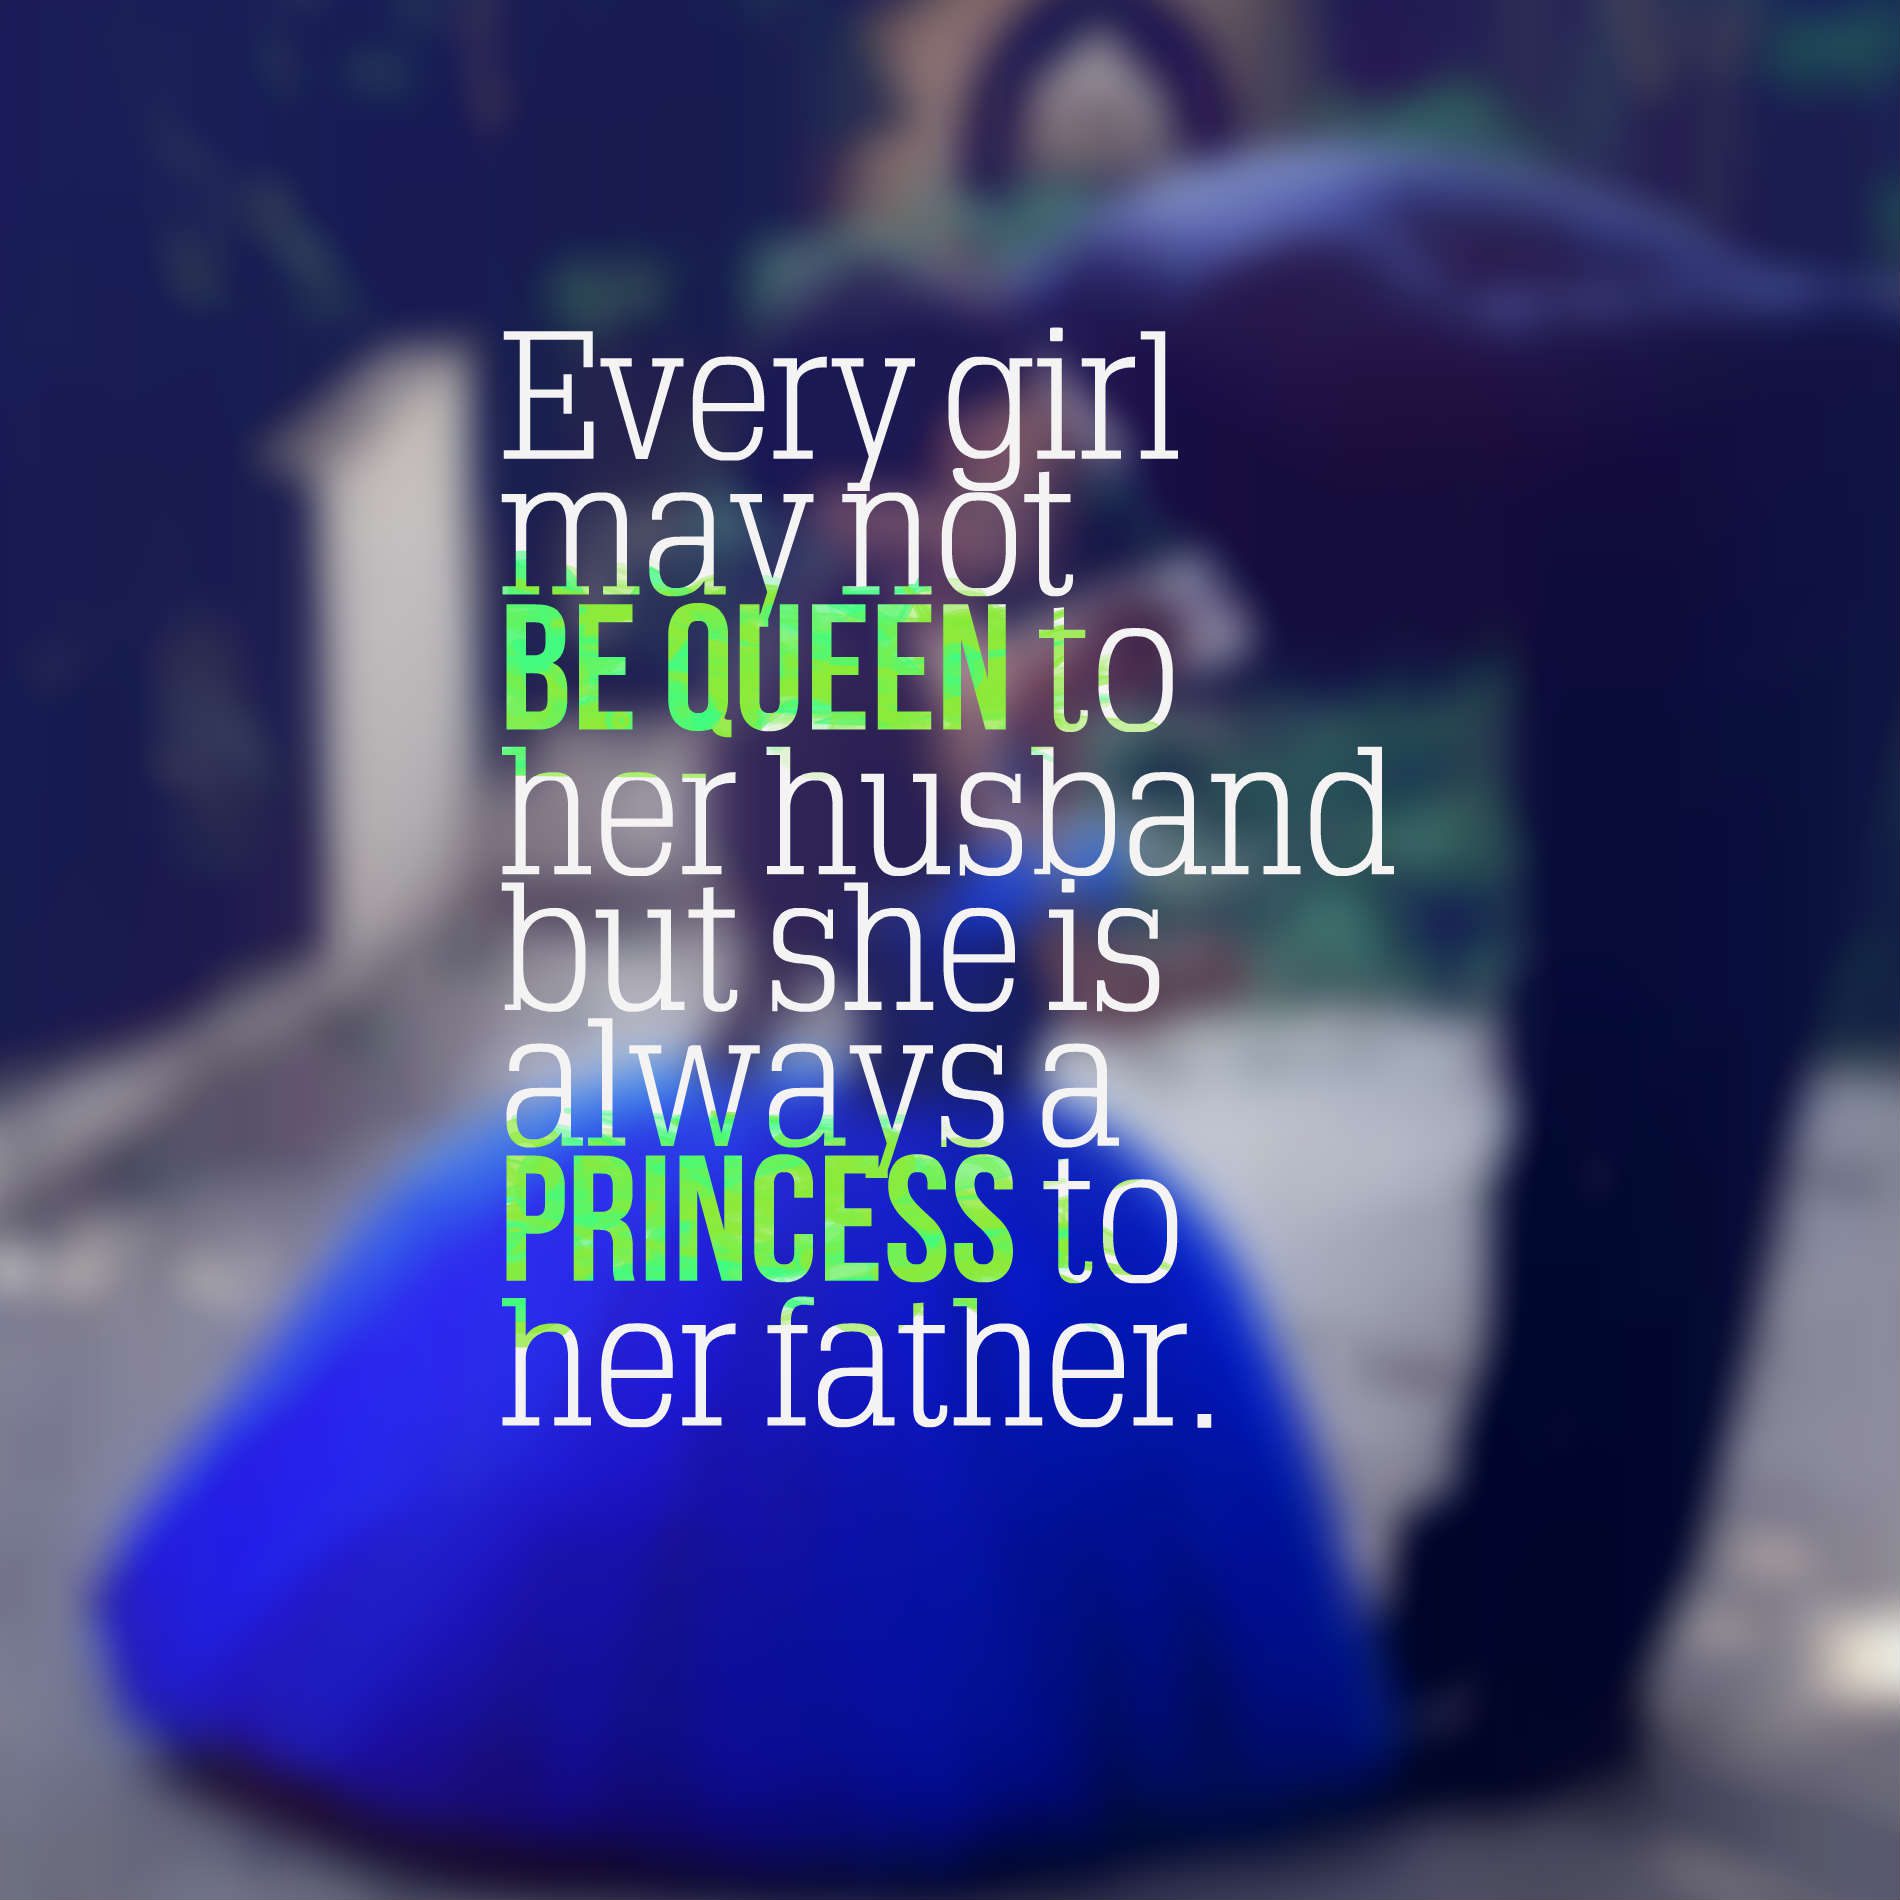 Every girl may not be queen to her husband but she is always a princess to her father.